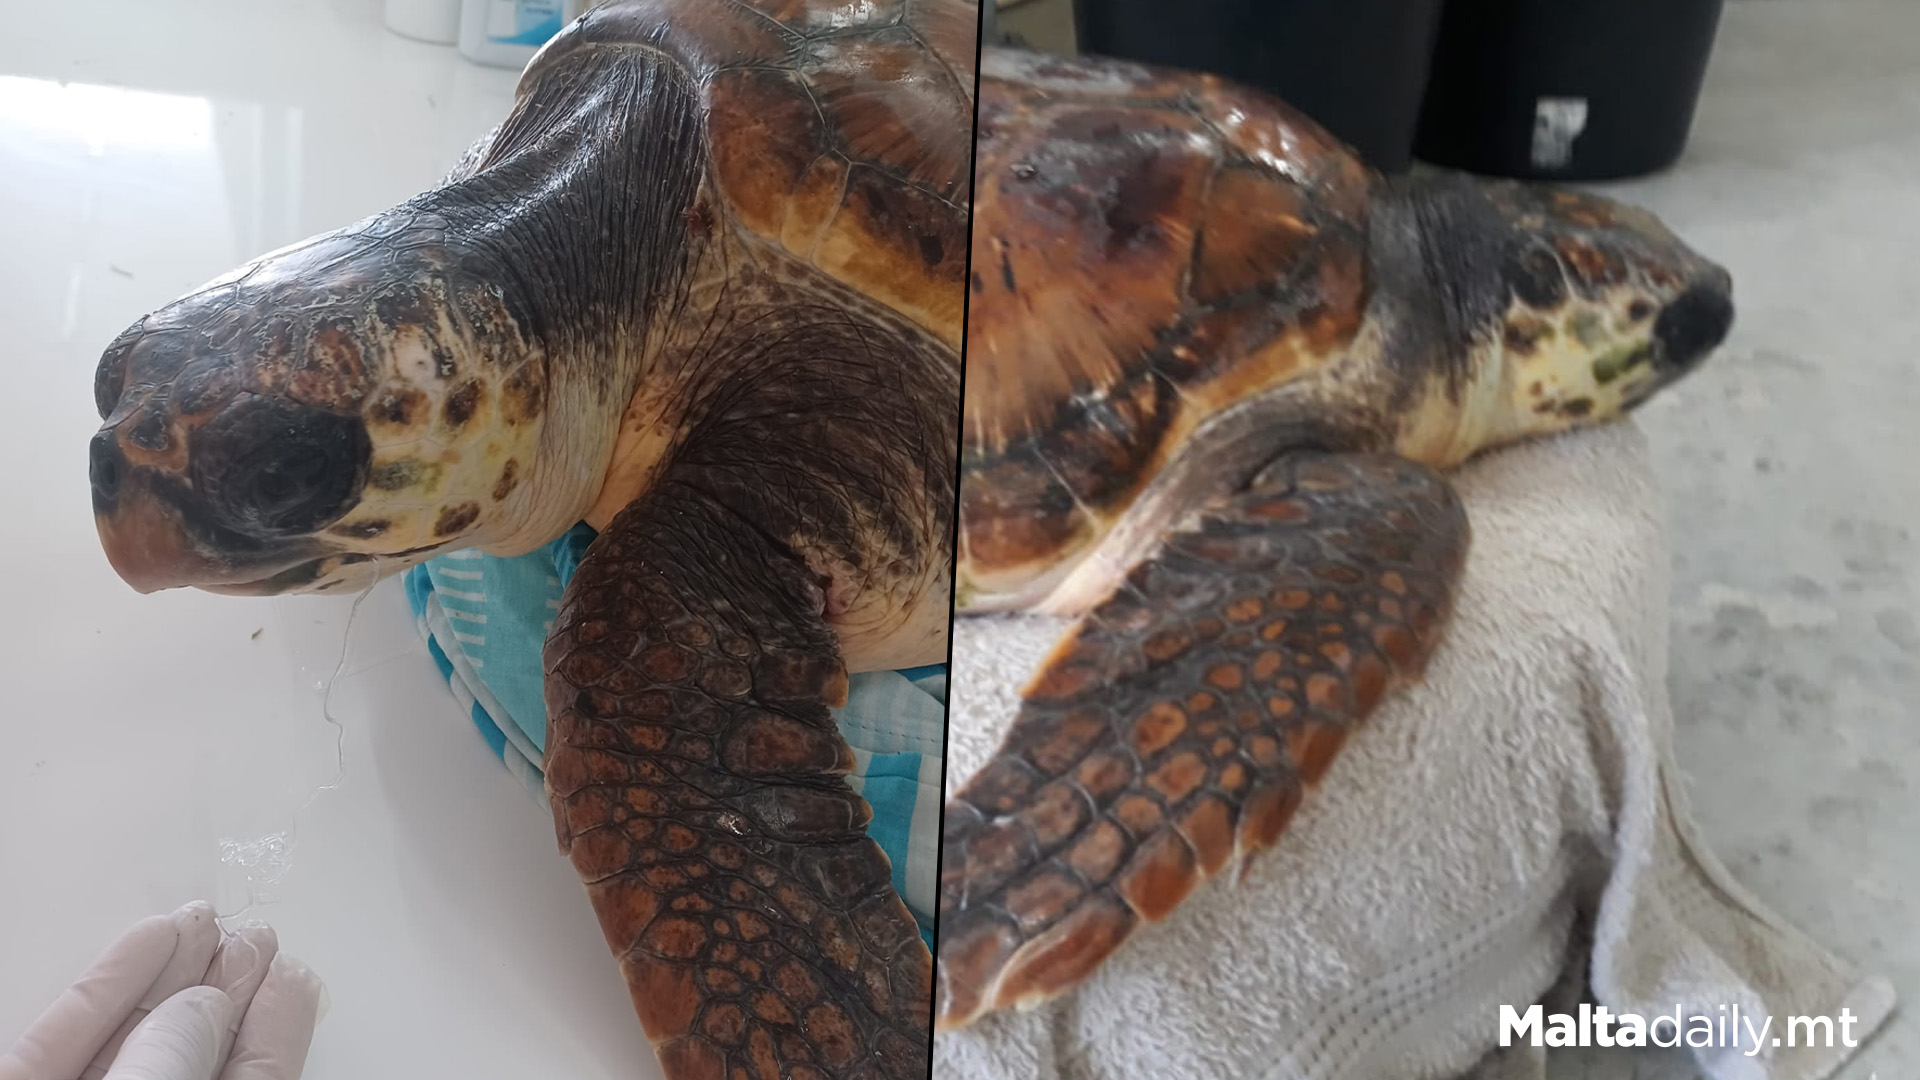 Yet Another Turtle Rescued From Fishing Line Entanglement